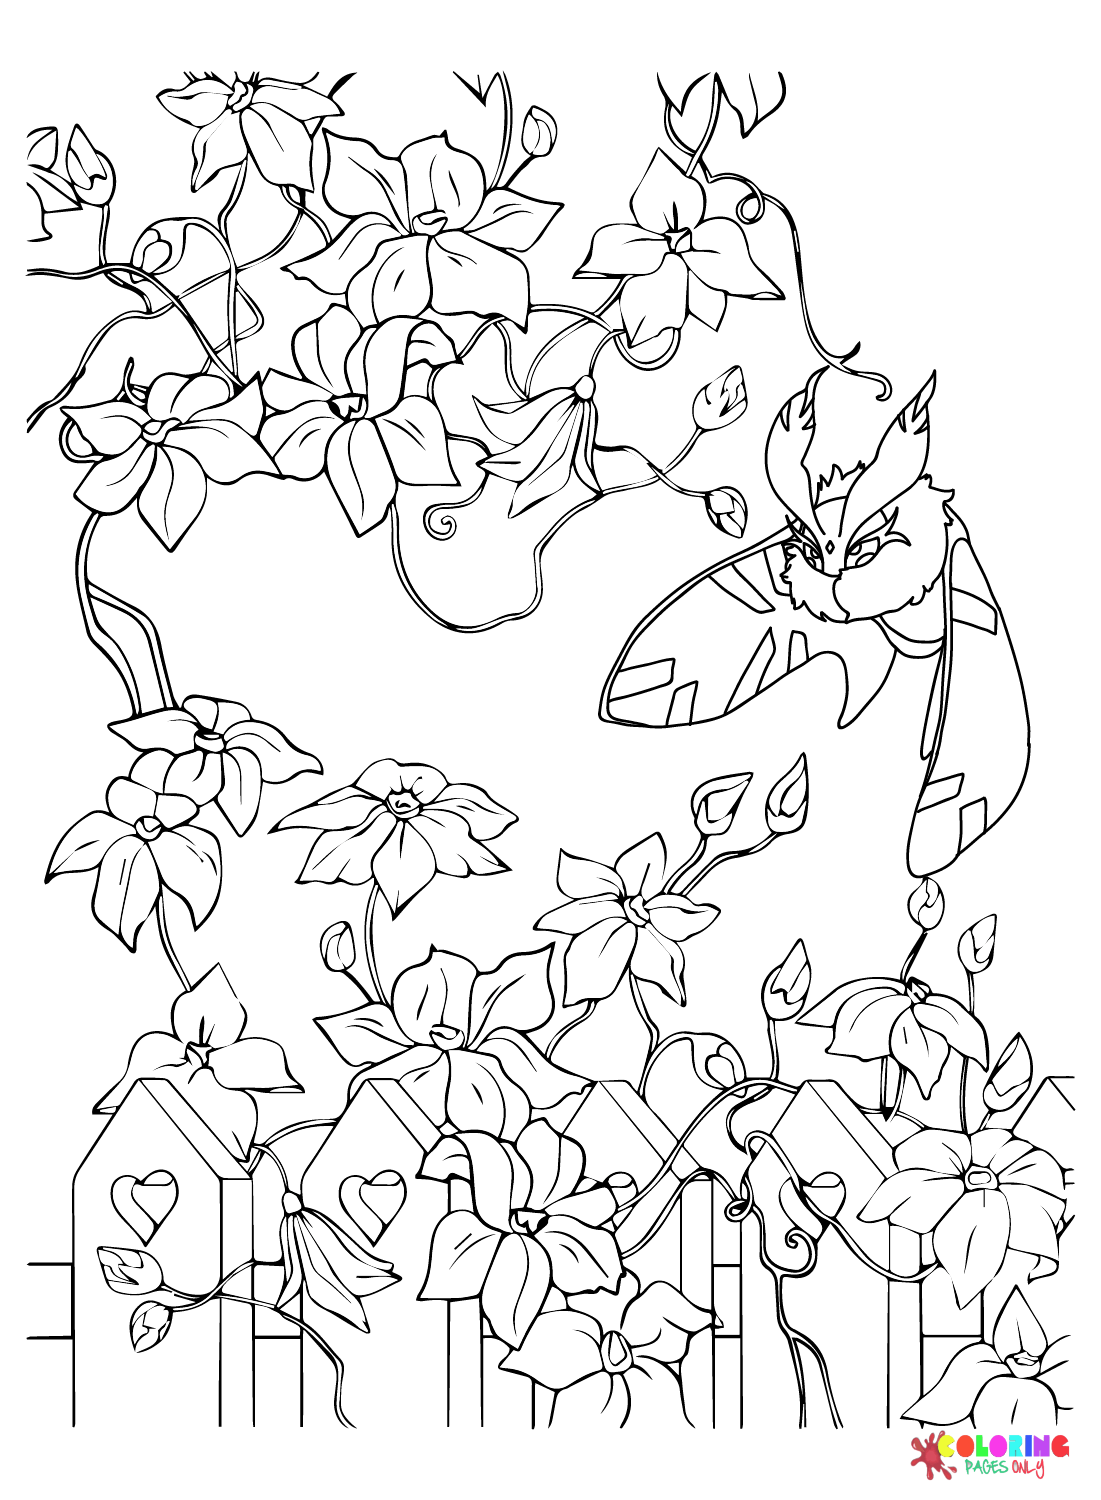 Frosmoth and Flower Coloring Page